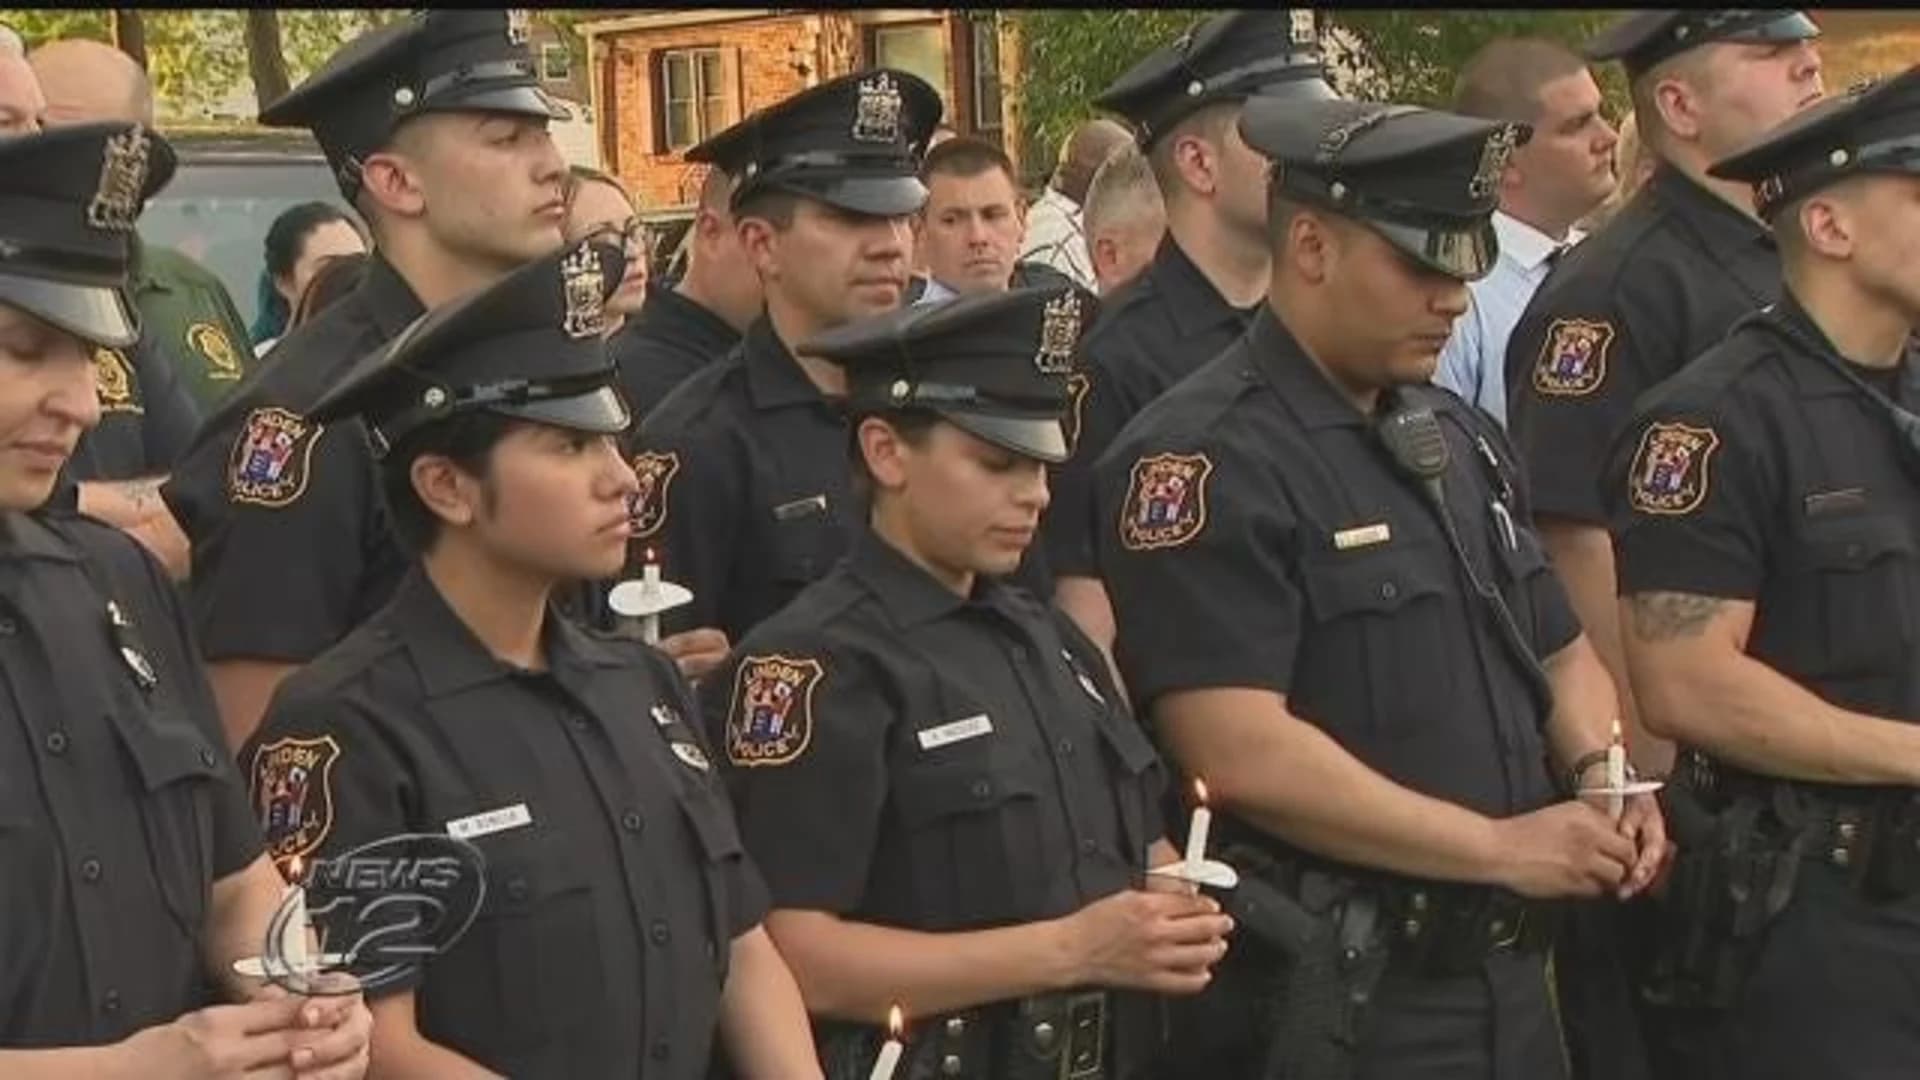 Candlelight vigil held for officer killed by train